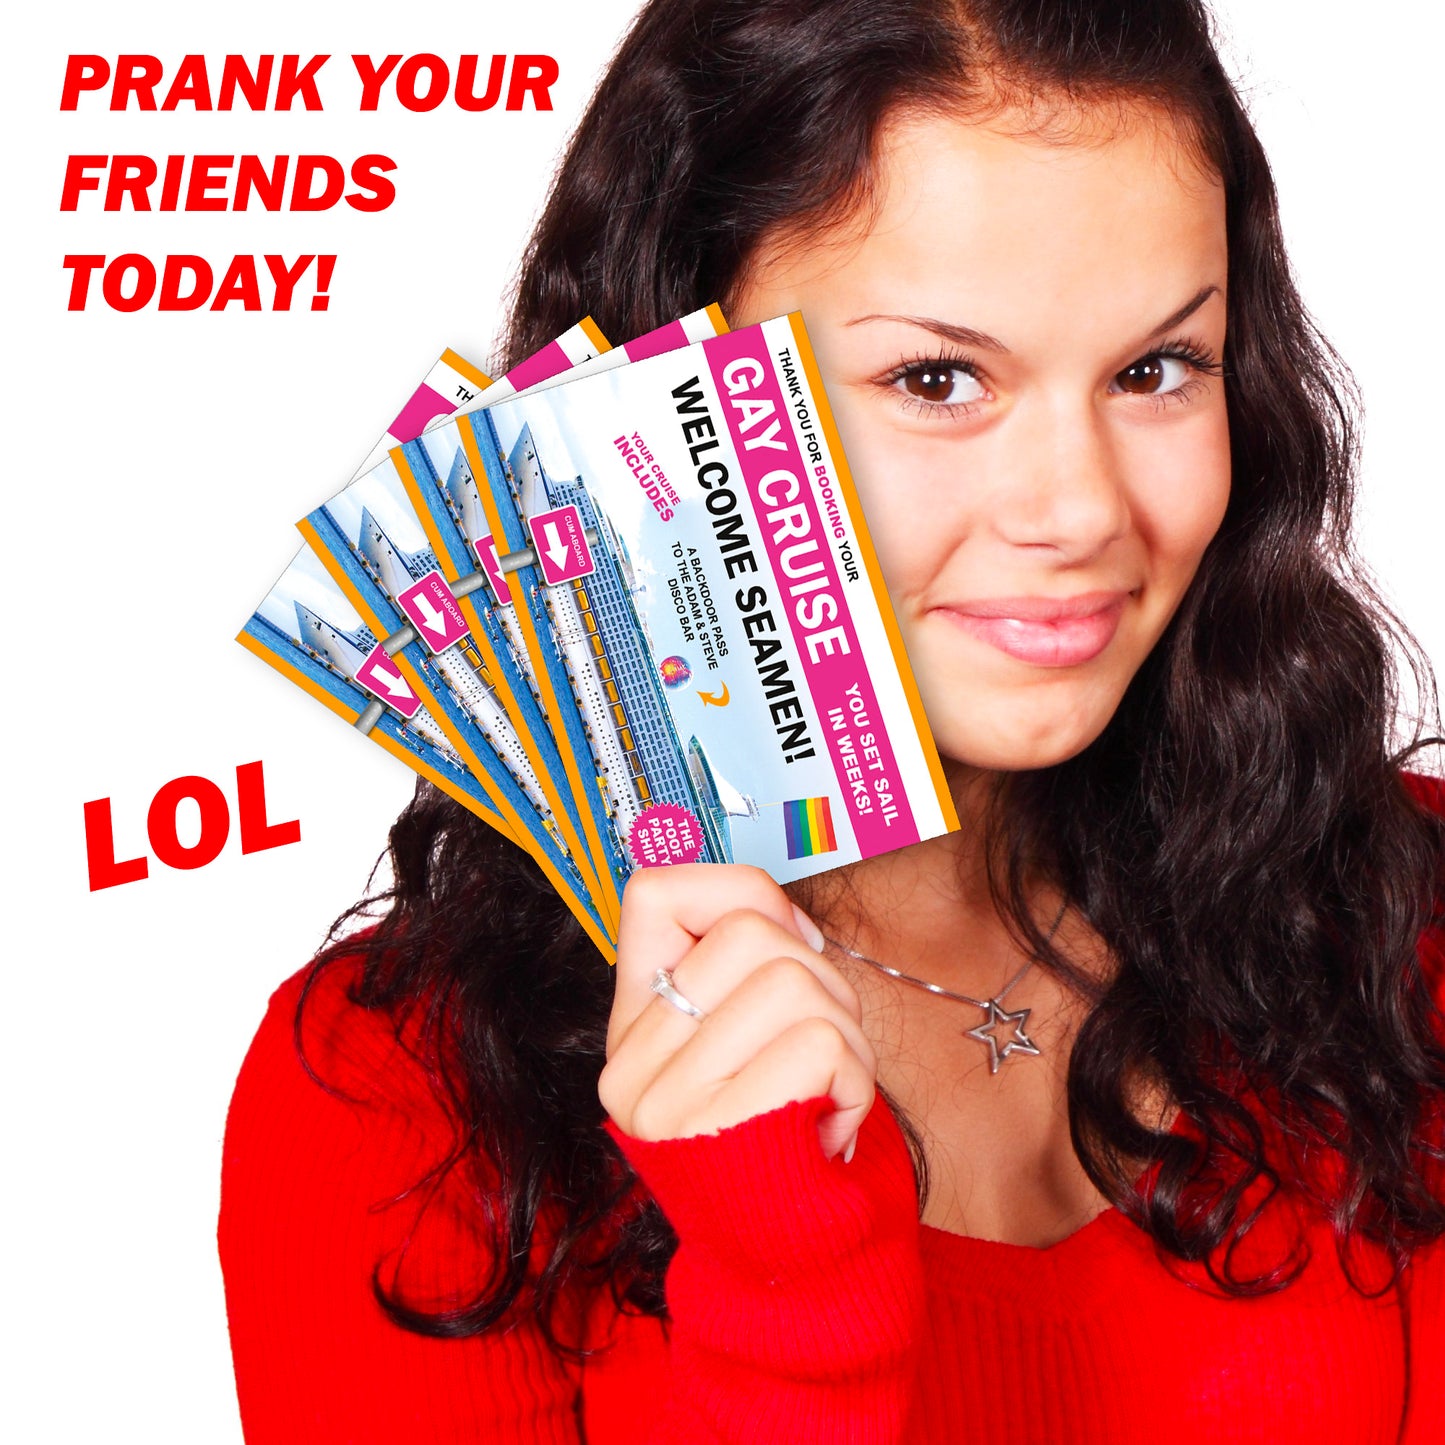 4 Pack Prank Gay Cruise Postcards sent to YOU so you can Play some Gags on your Friends yourself!